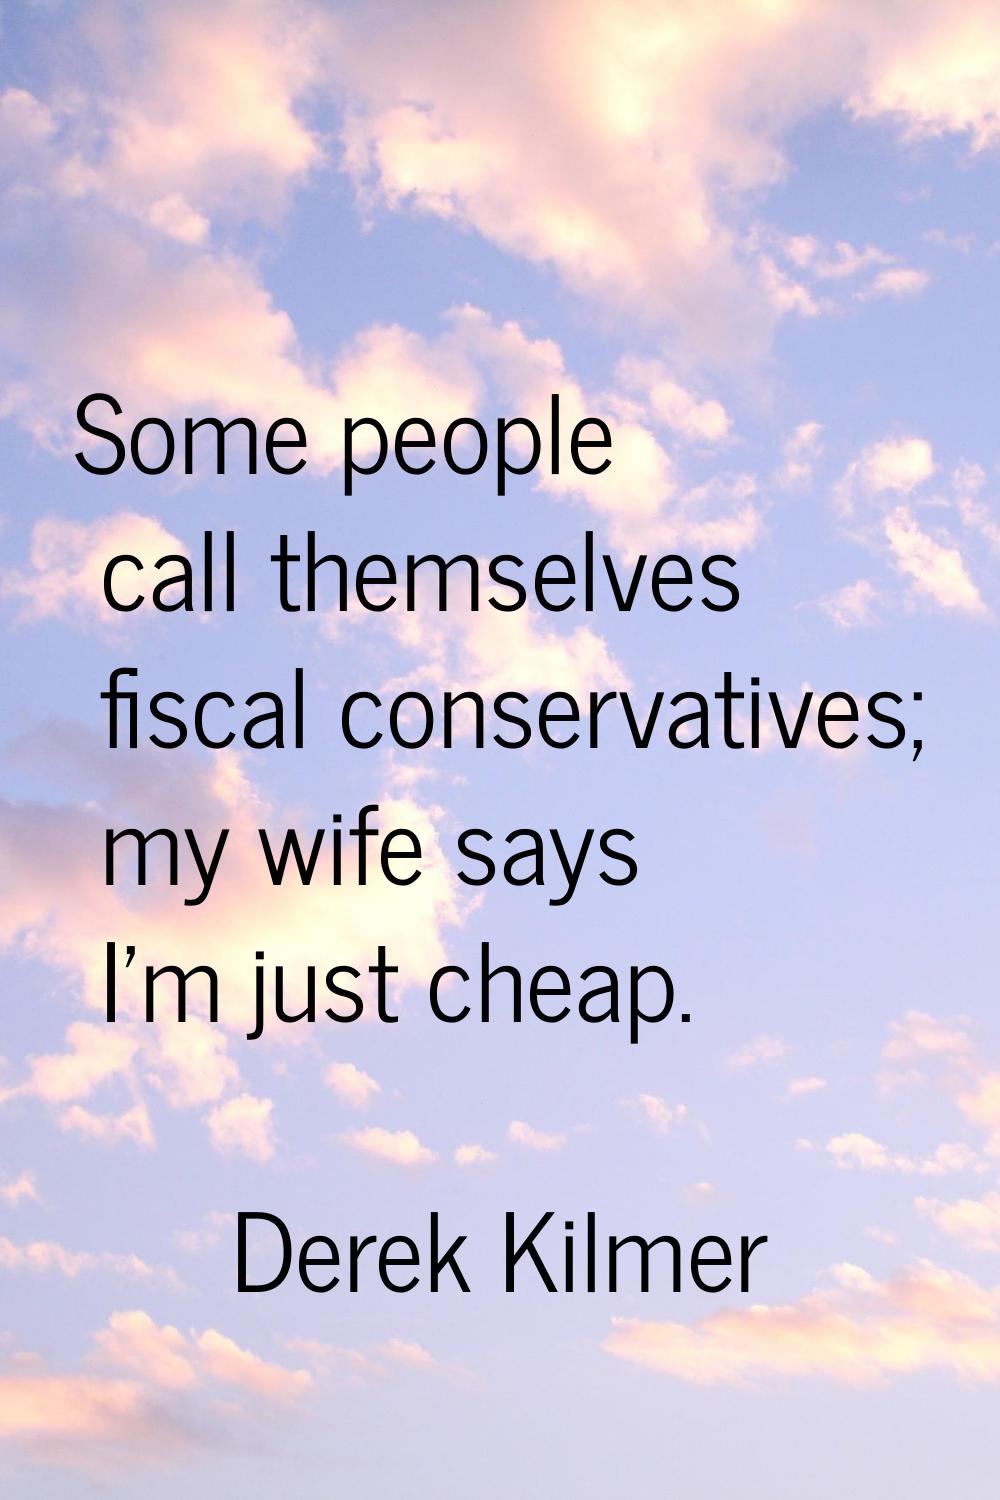 Some people call themselves fiscal conservatives; my wife says I'm just cheap.